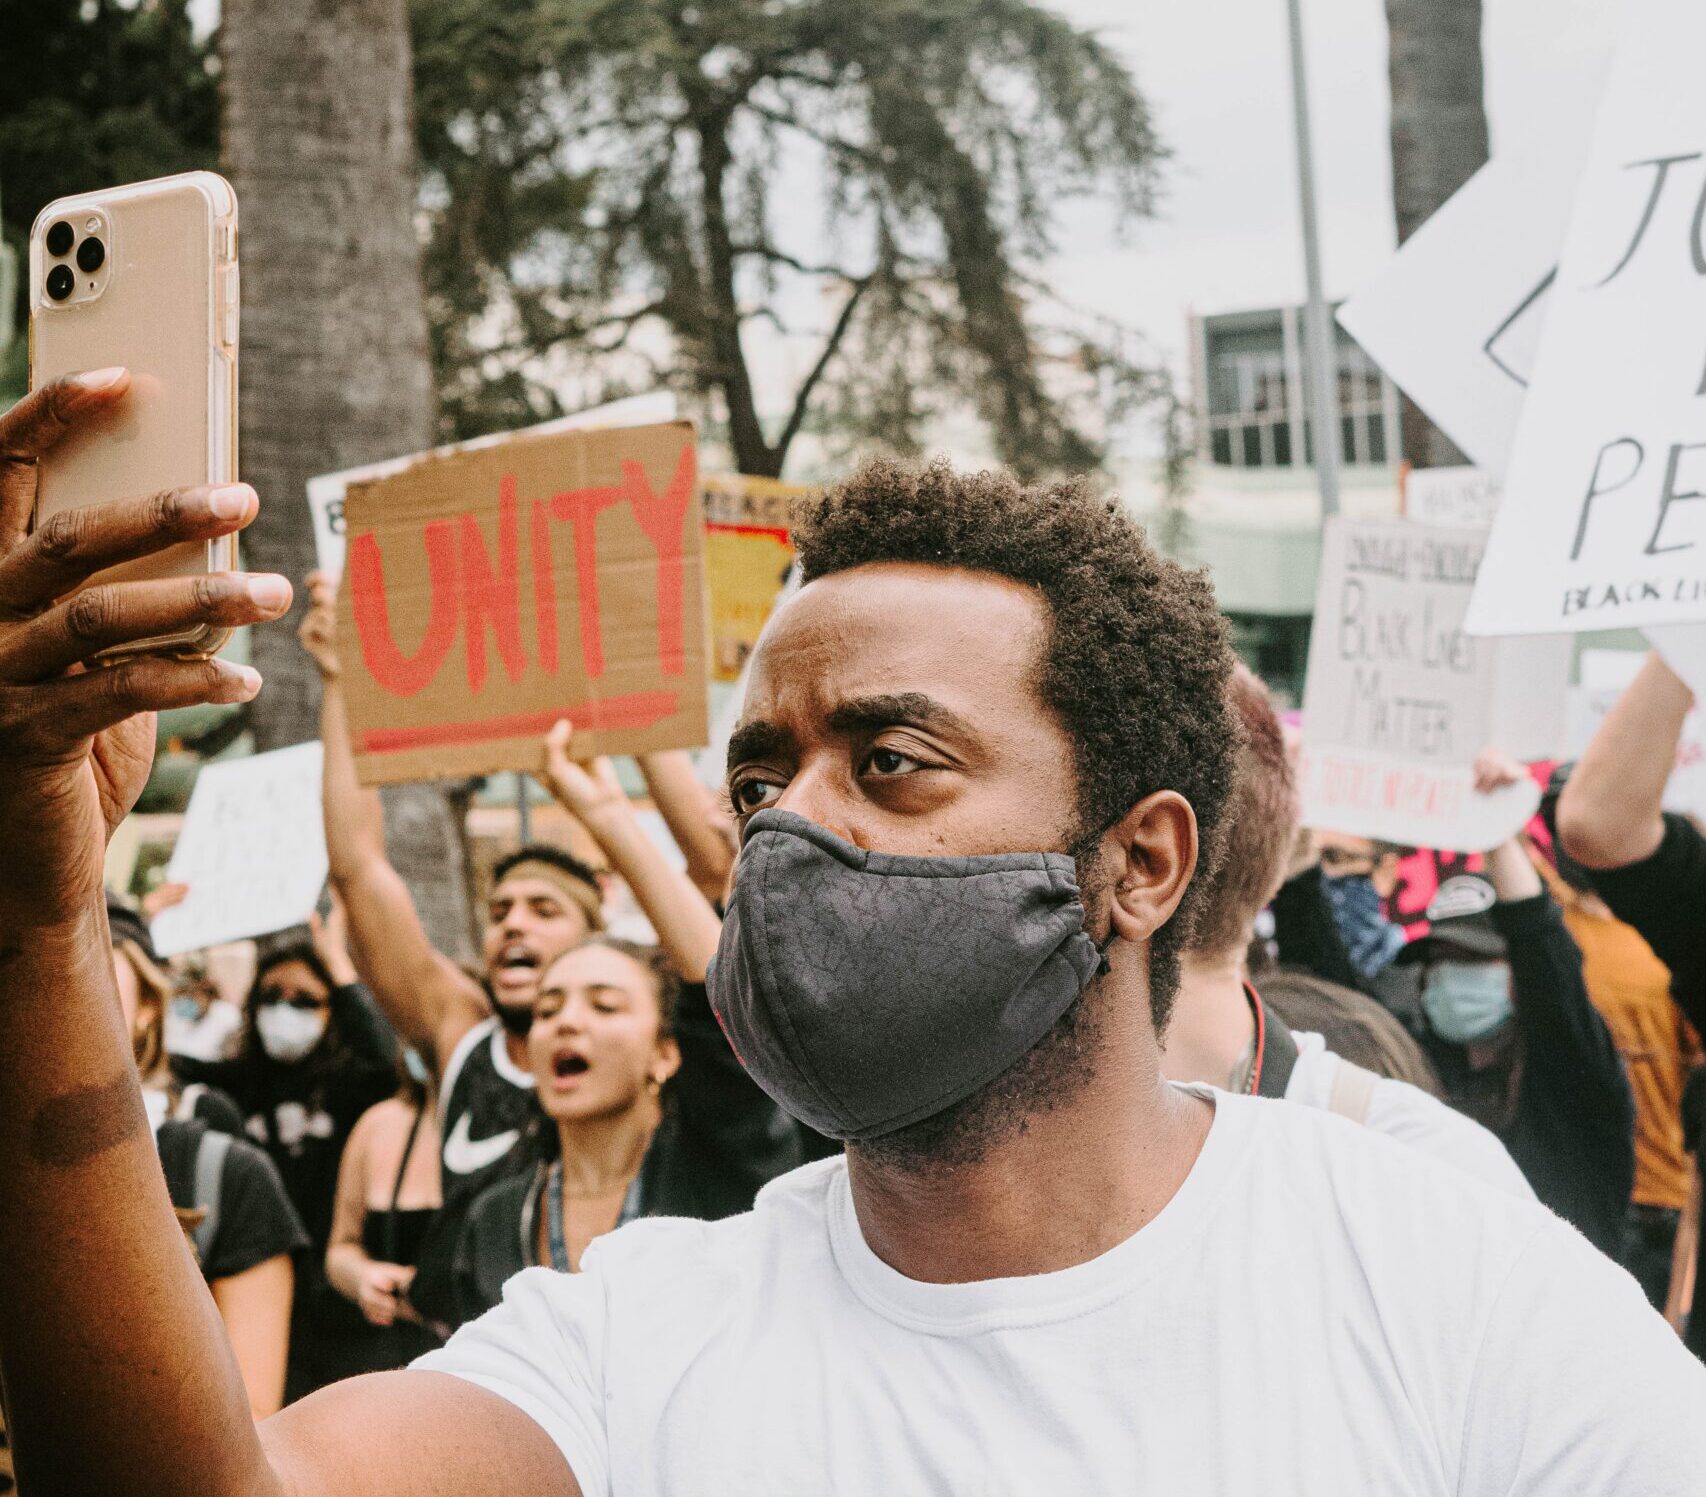 A man with brown hair and a mask uses his phone at a protest, a sign with the word 